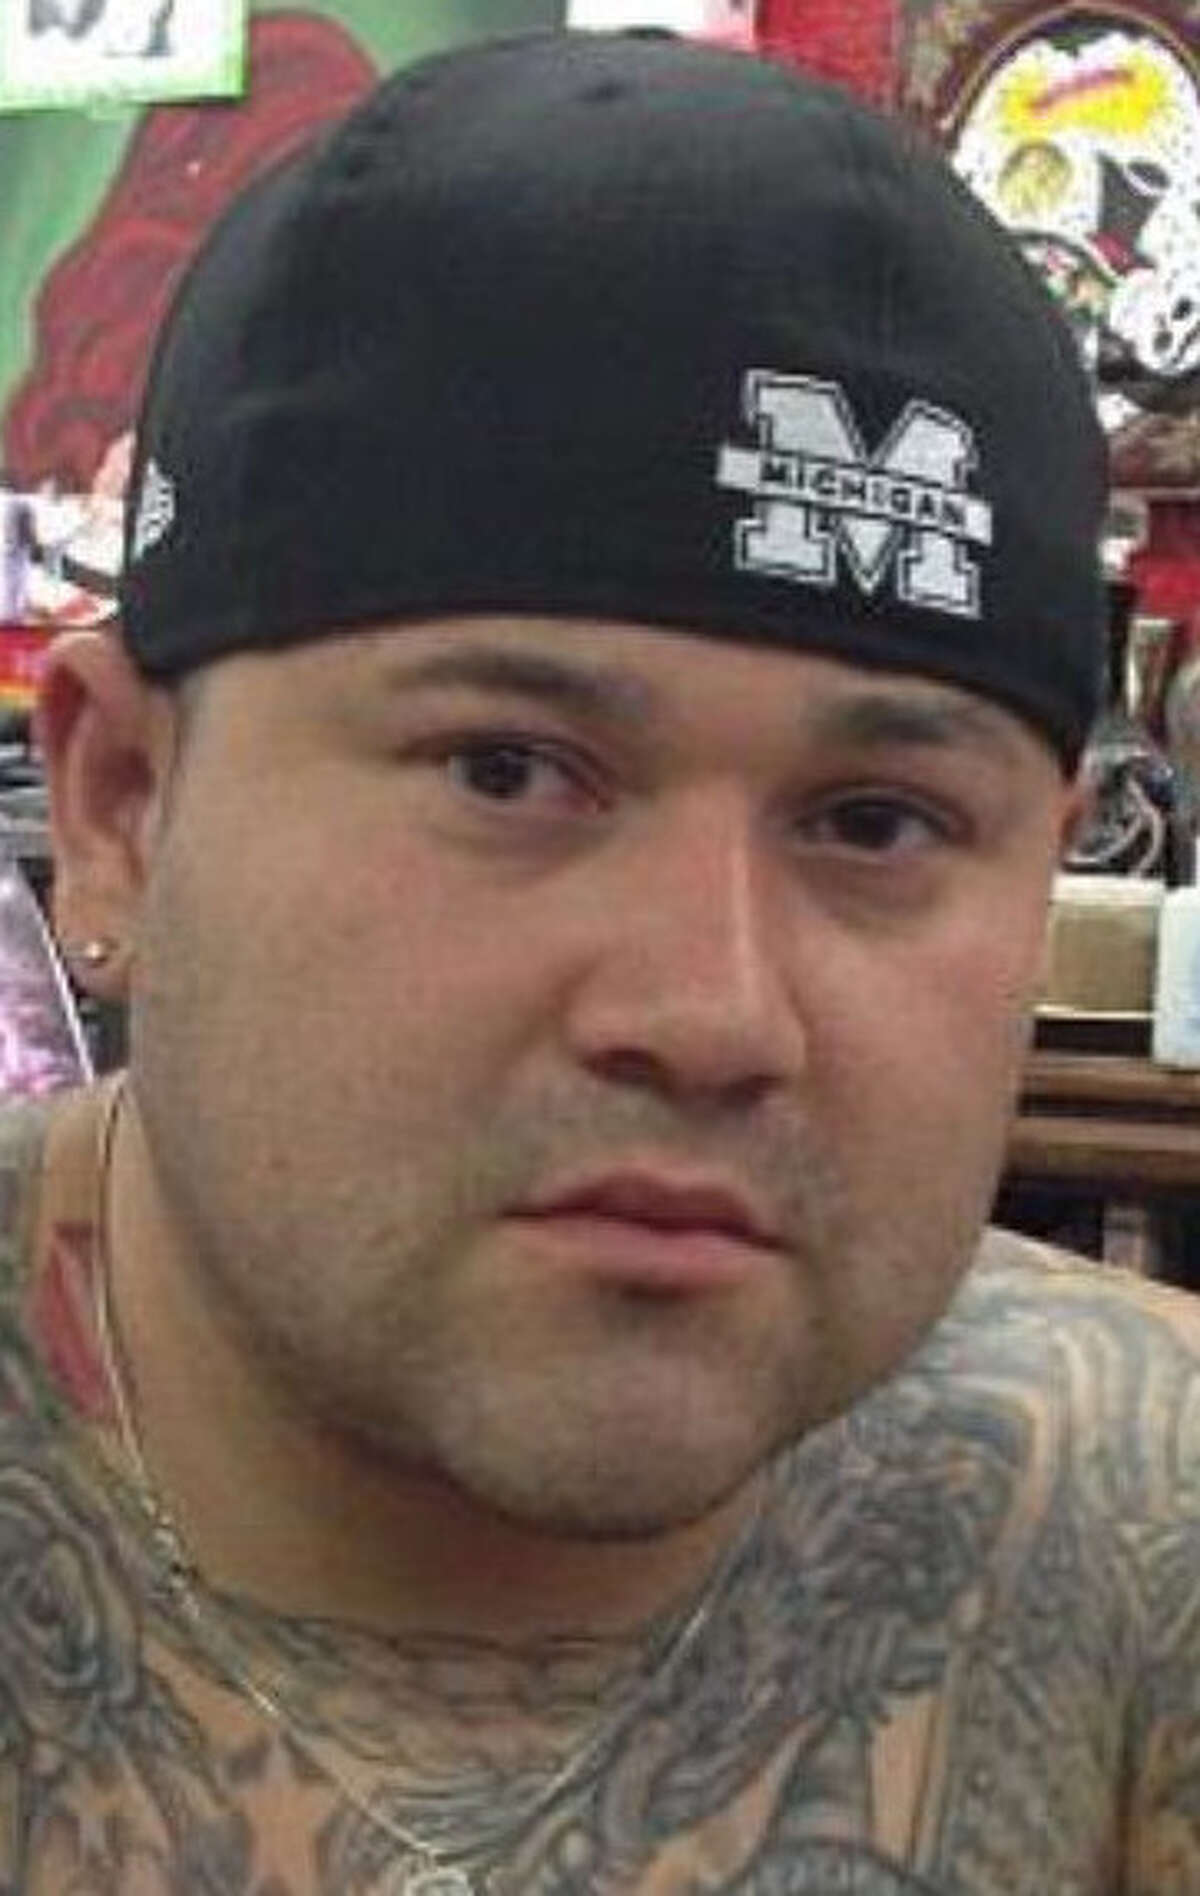 Balcones Heights Police Officer Julian Pesina was off-duty when he was shot May 4 outside a tattoo parlor he co-owned.